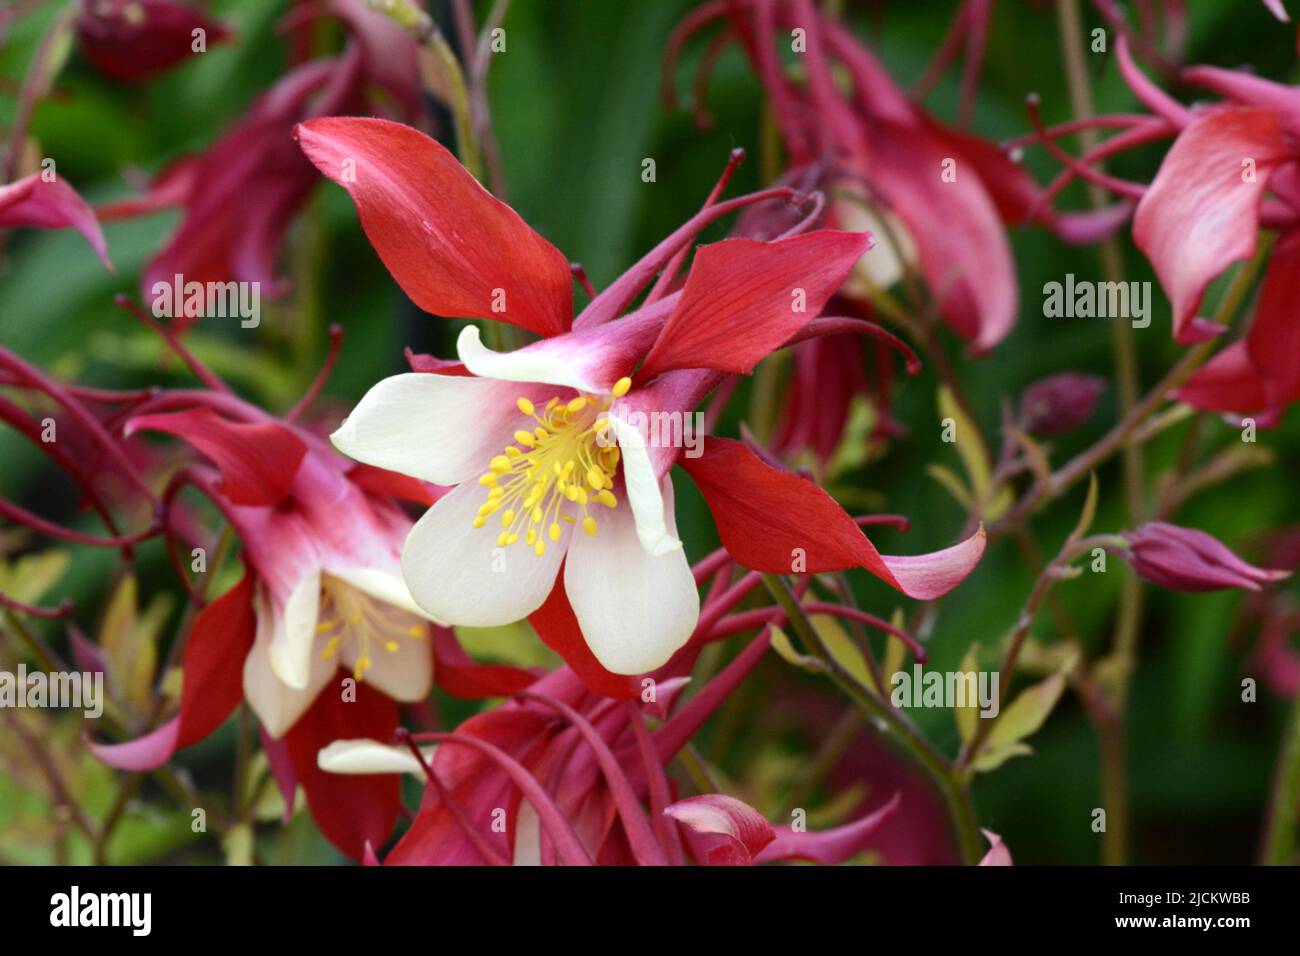 Aquilegia Red Hobbit Columbine Red Hobbit spurred red flowers with white inner petals Stock Photo